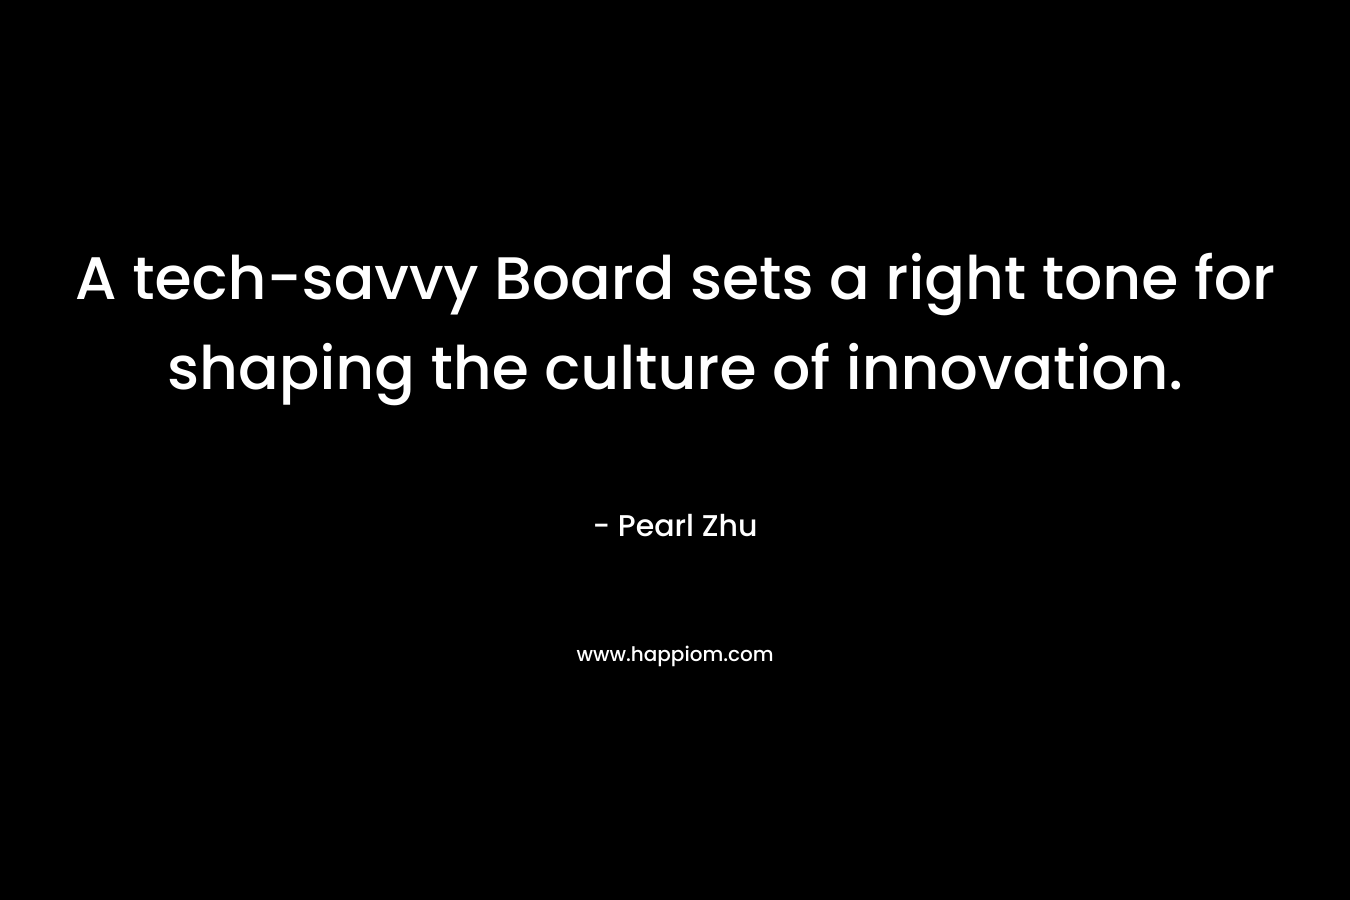 A tech-savvy Board sets a right tone for shaping the culture of innovation.